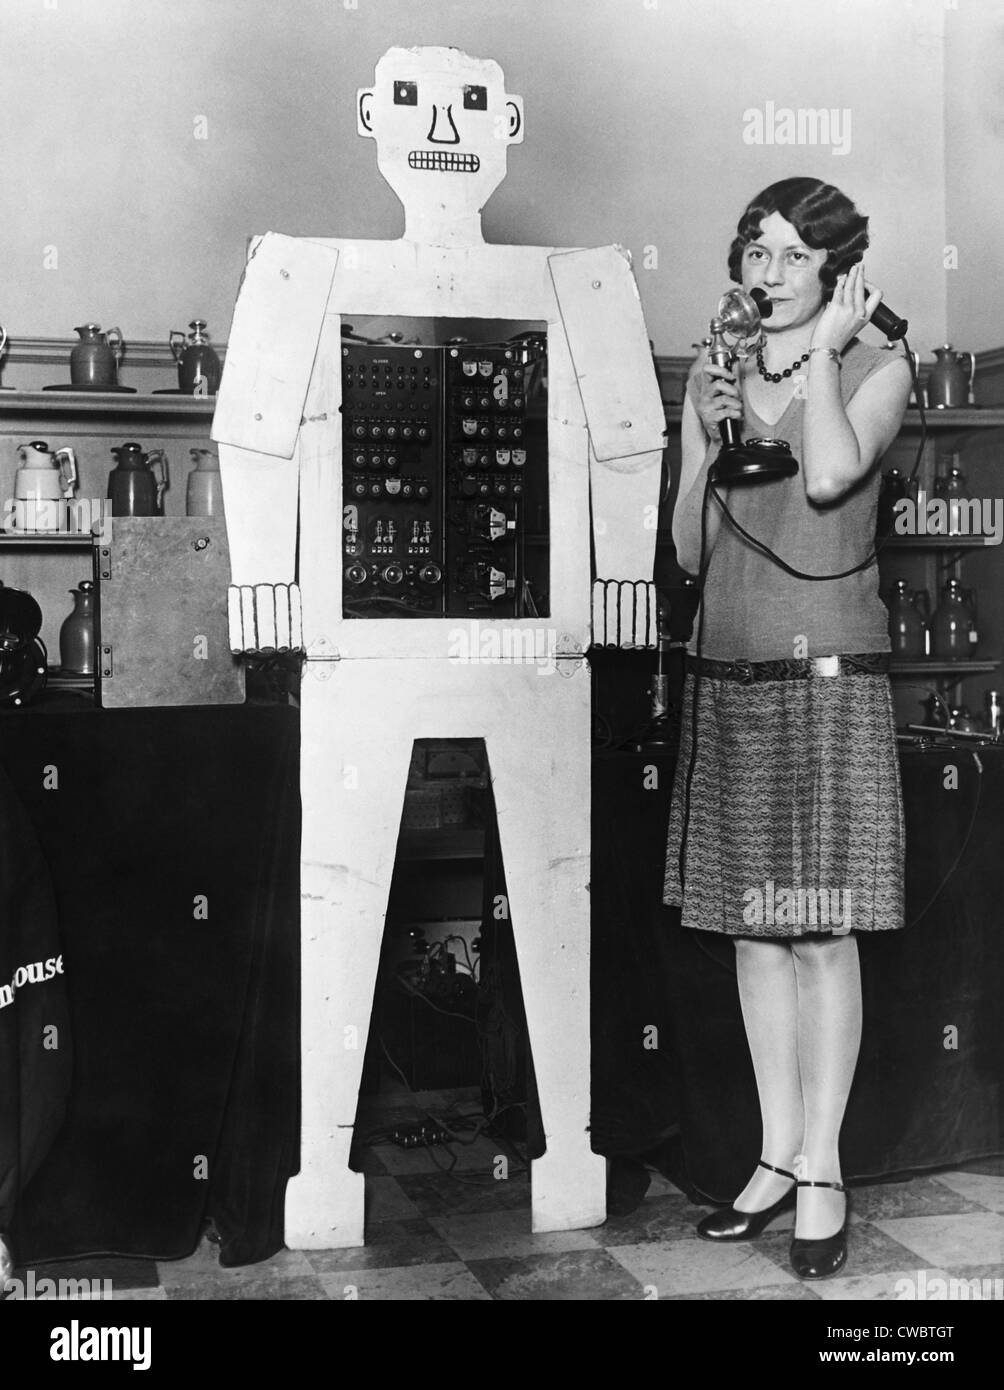 Mr. Televox, was designed by Westinghouse to promote an early remote control switching device, the Televox. The robot was Stock Photo